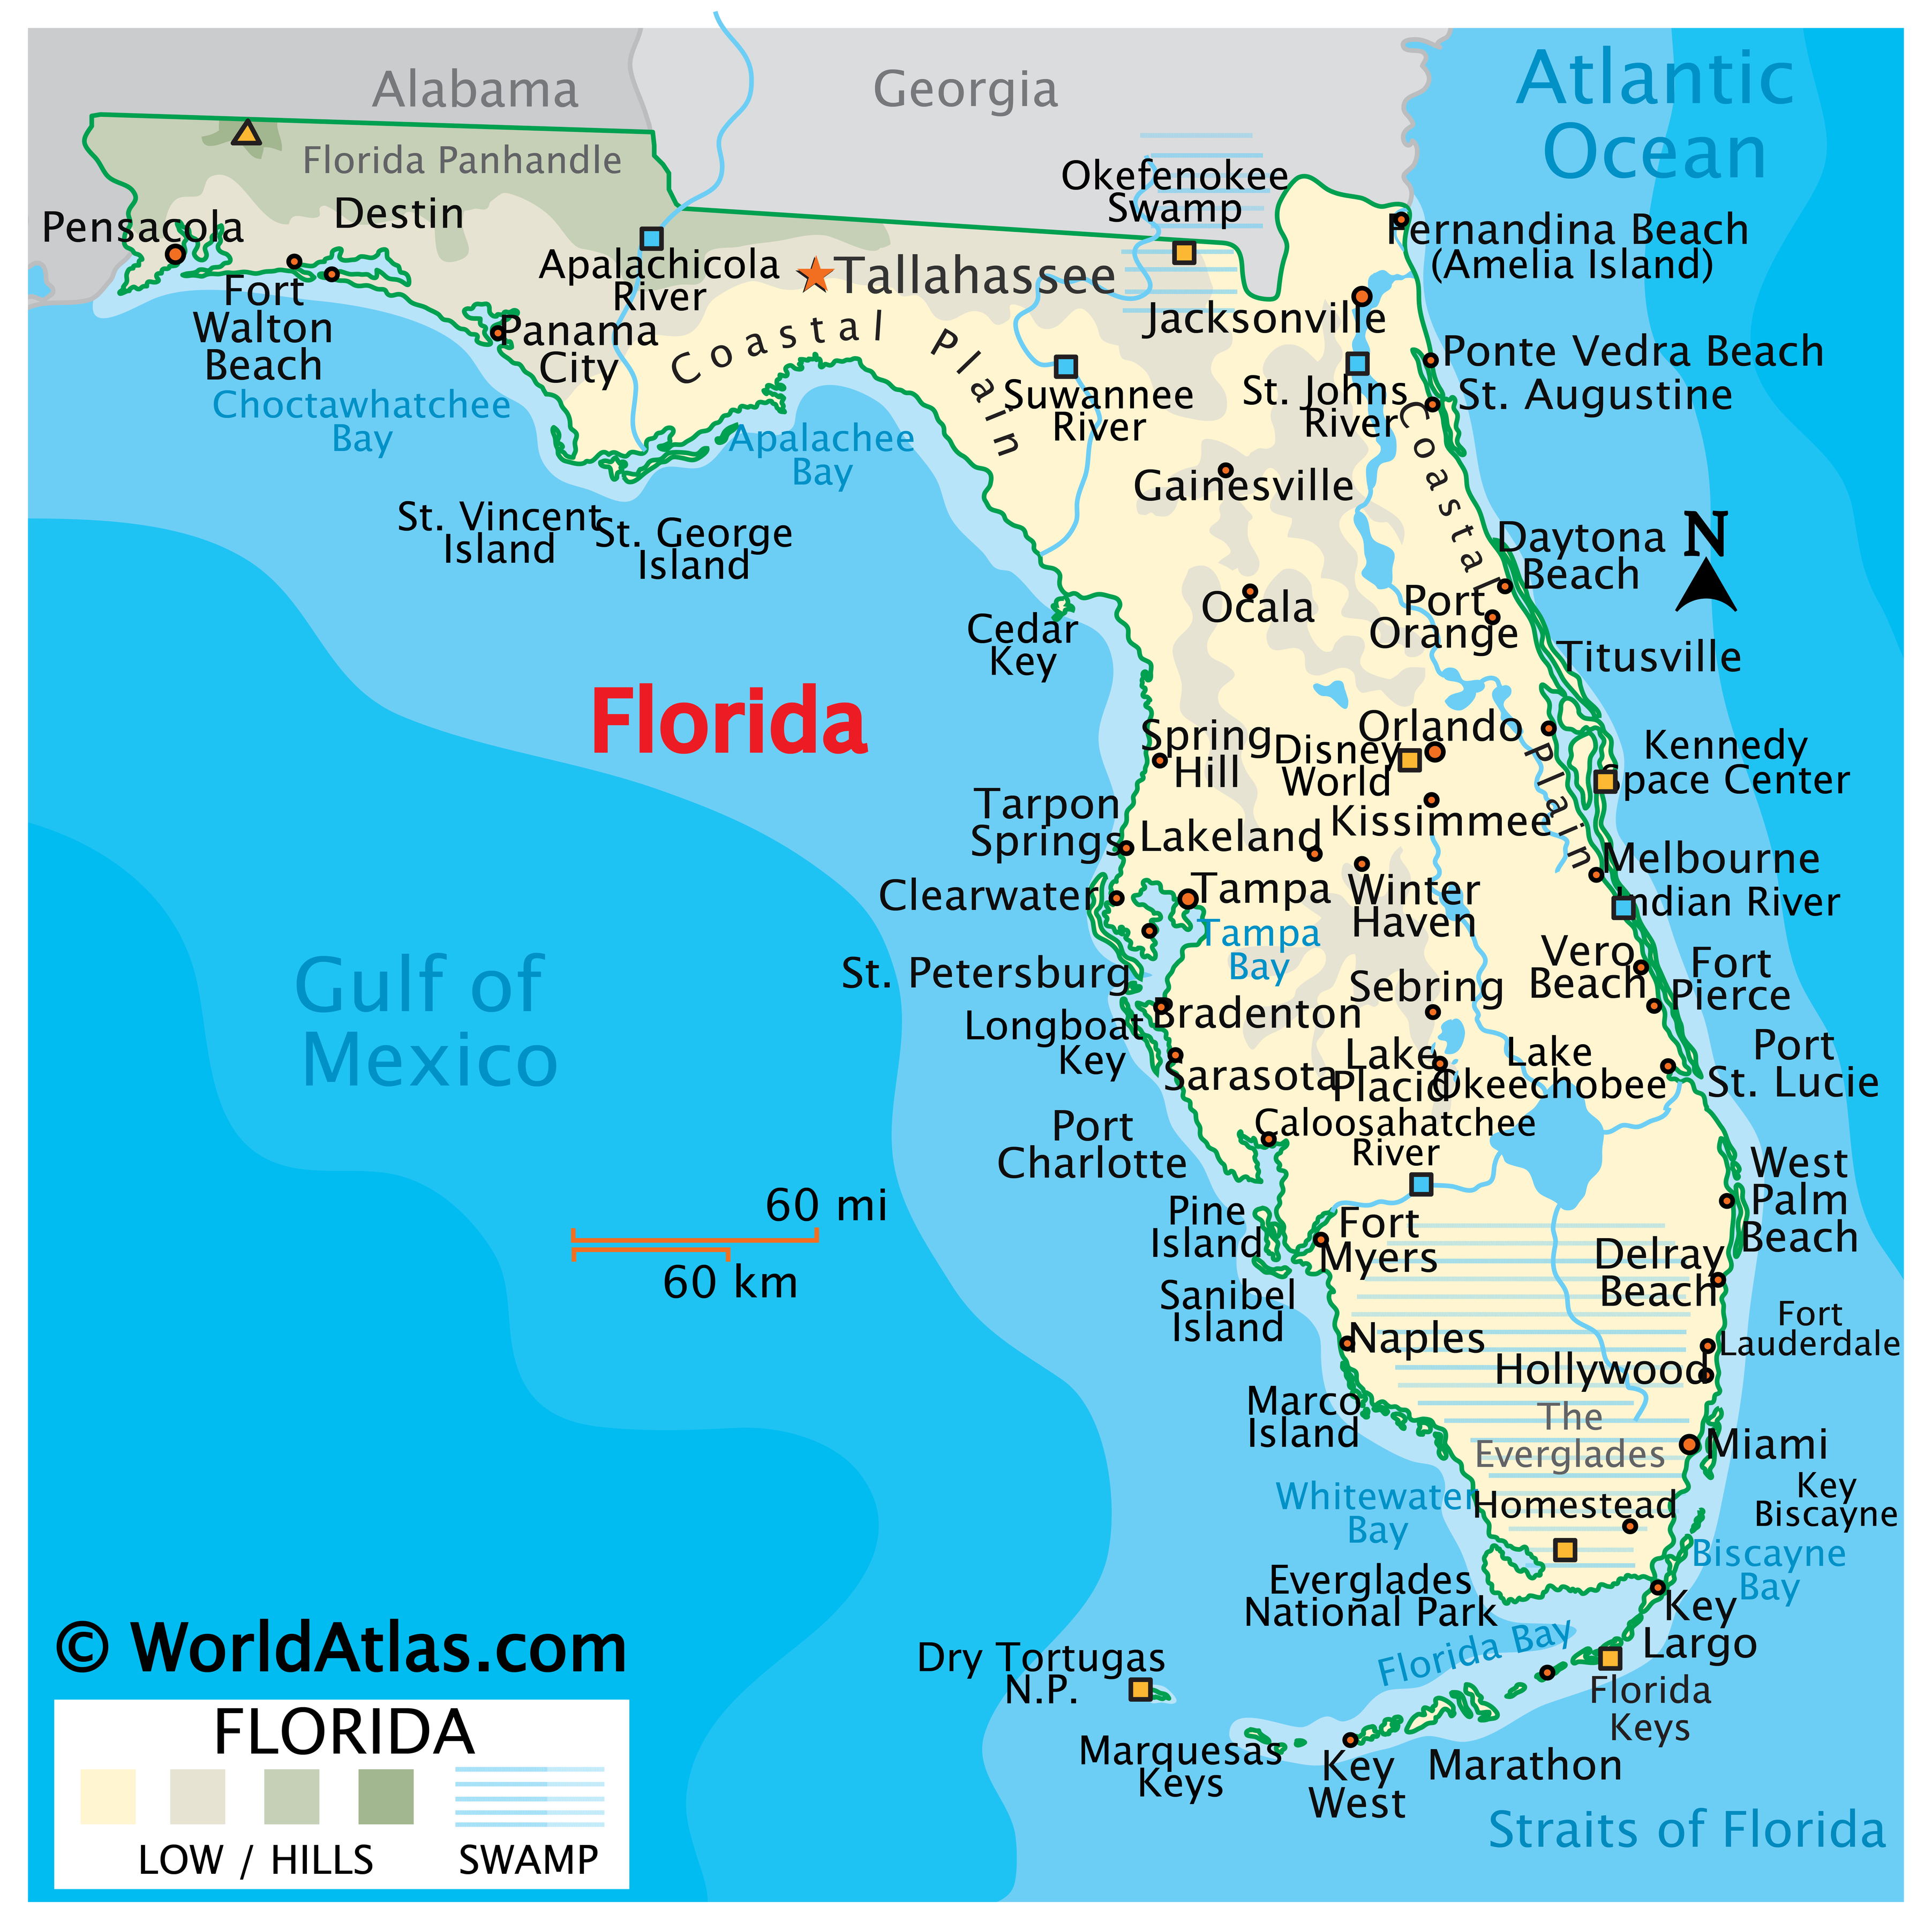 show a map of florida Florida Map Geography Of Florida Map Of Florida Worldatlas Com show a map of florida